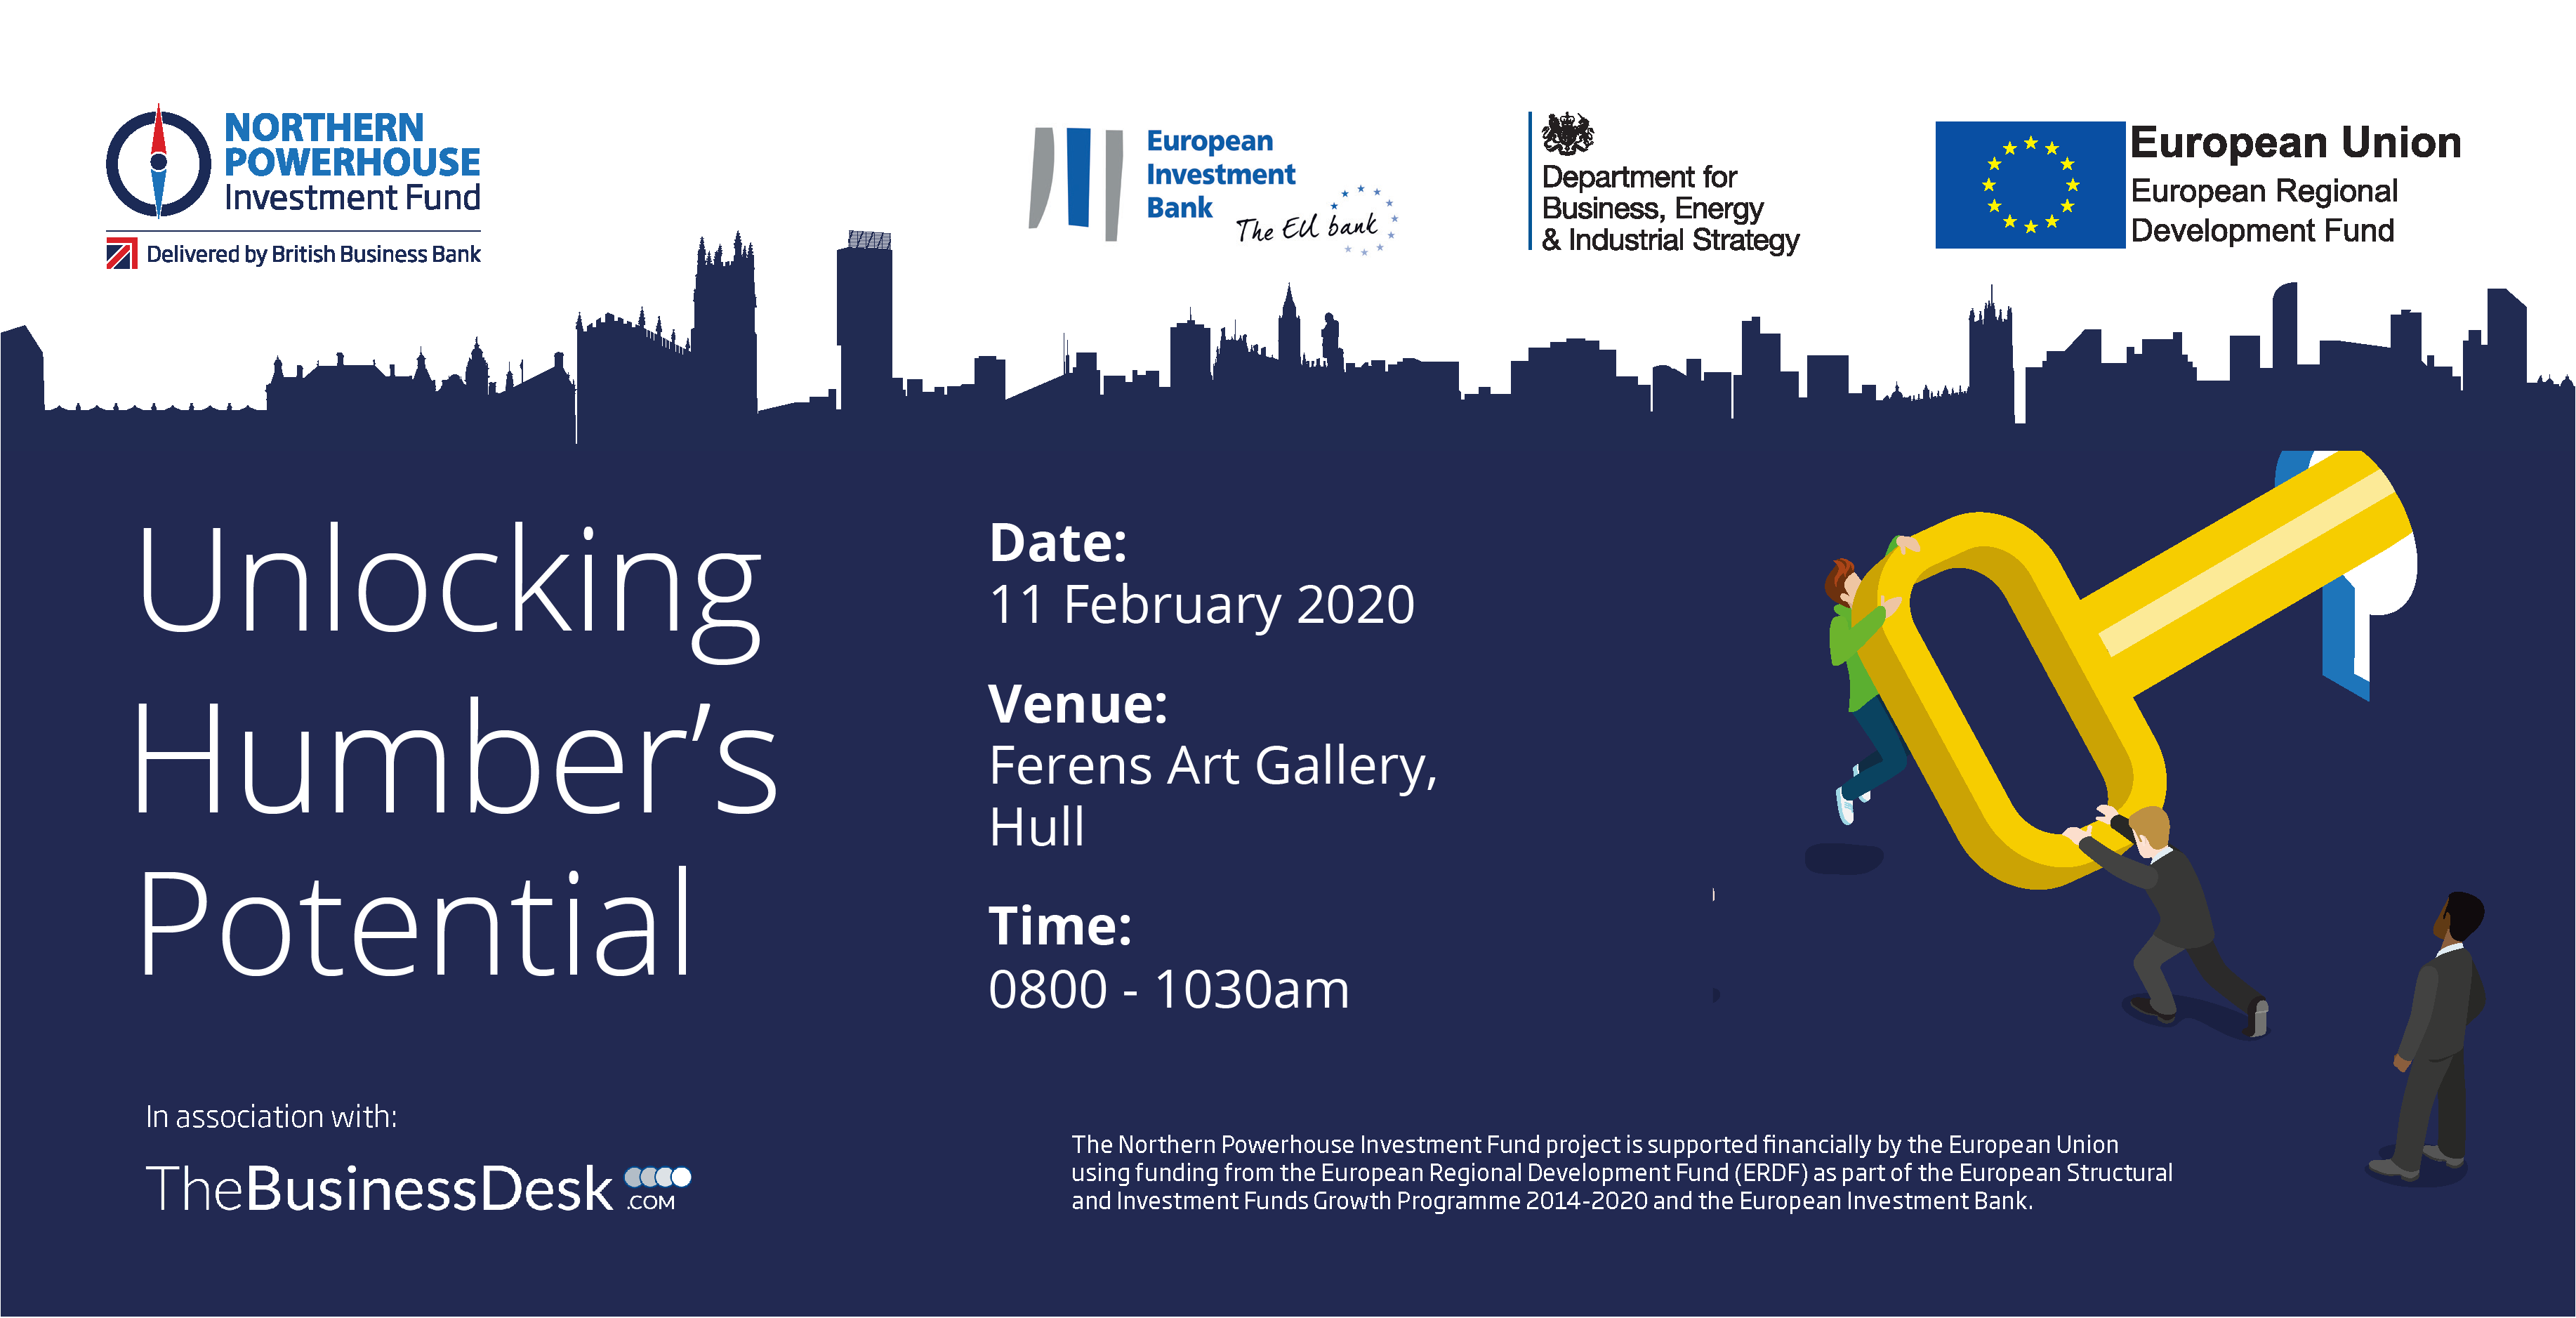 A digital poster for Unlocking Humber's Potential event